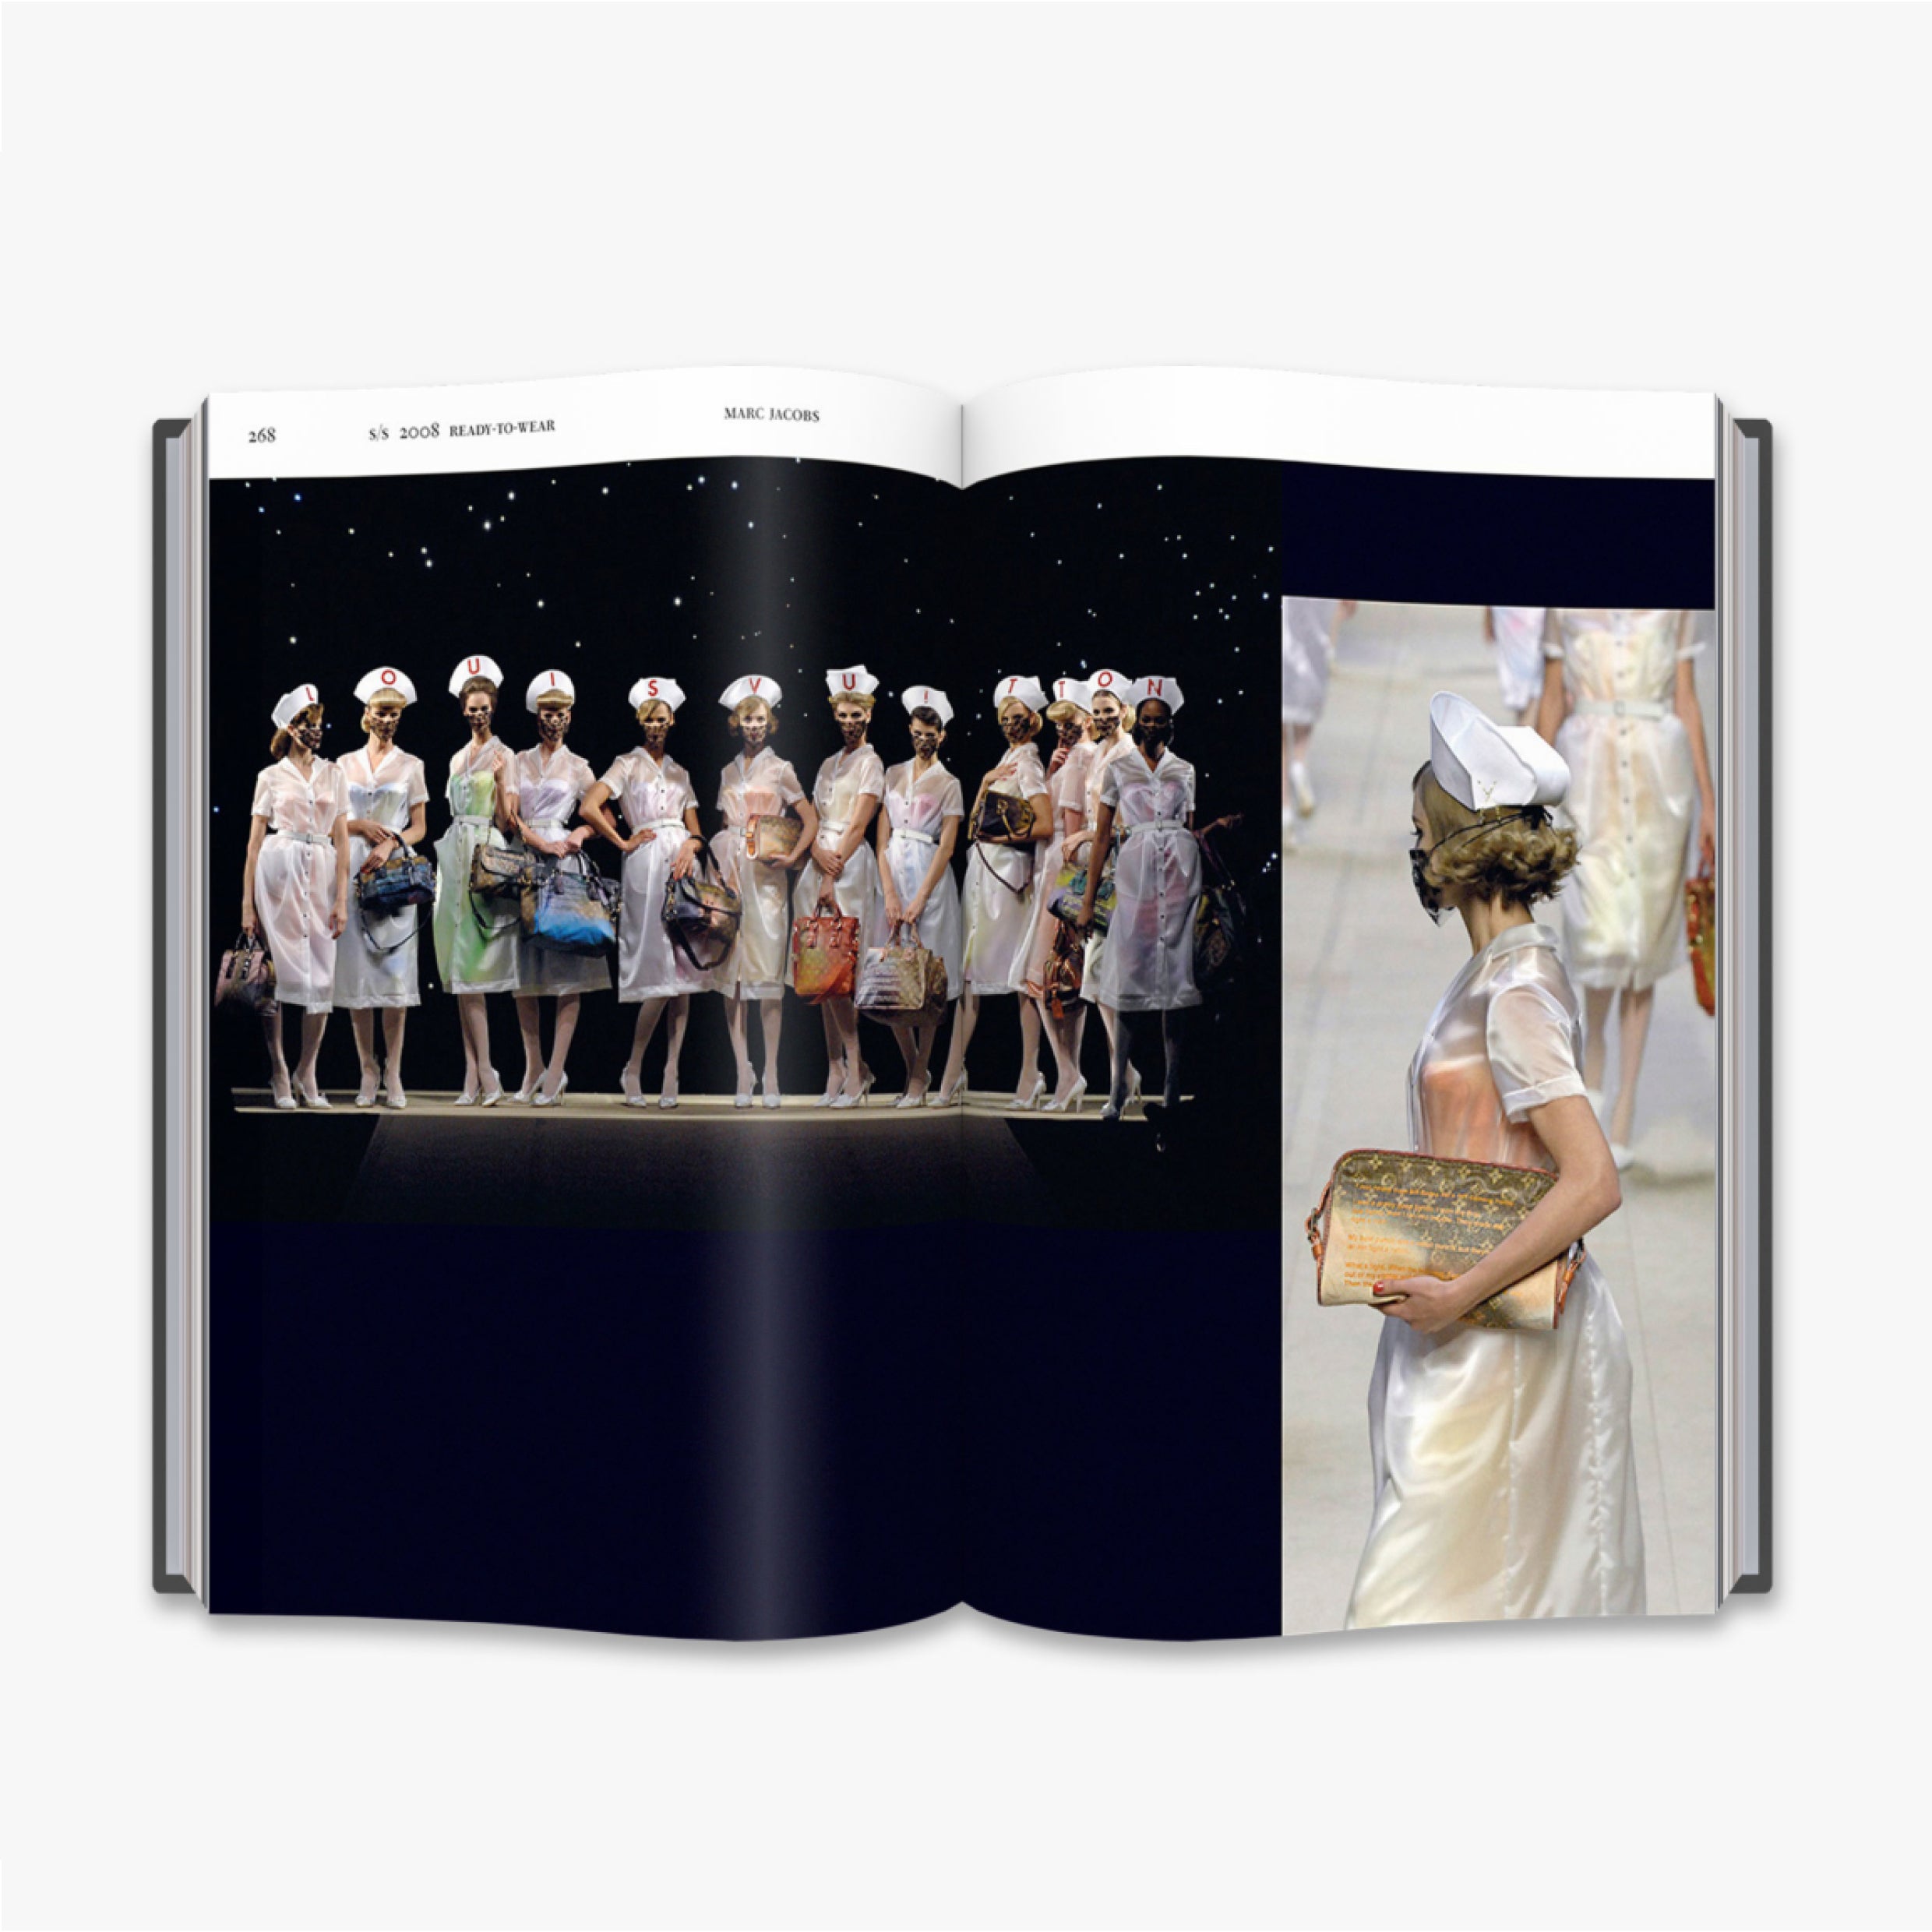 LOUIS VUITTON CATWALK BOOK - Magpies Gifts